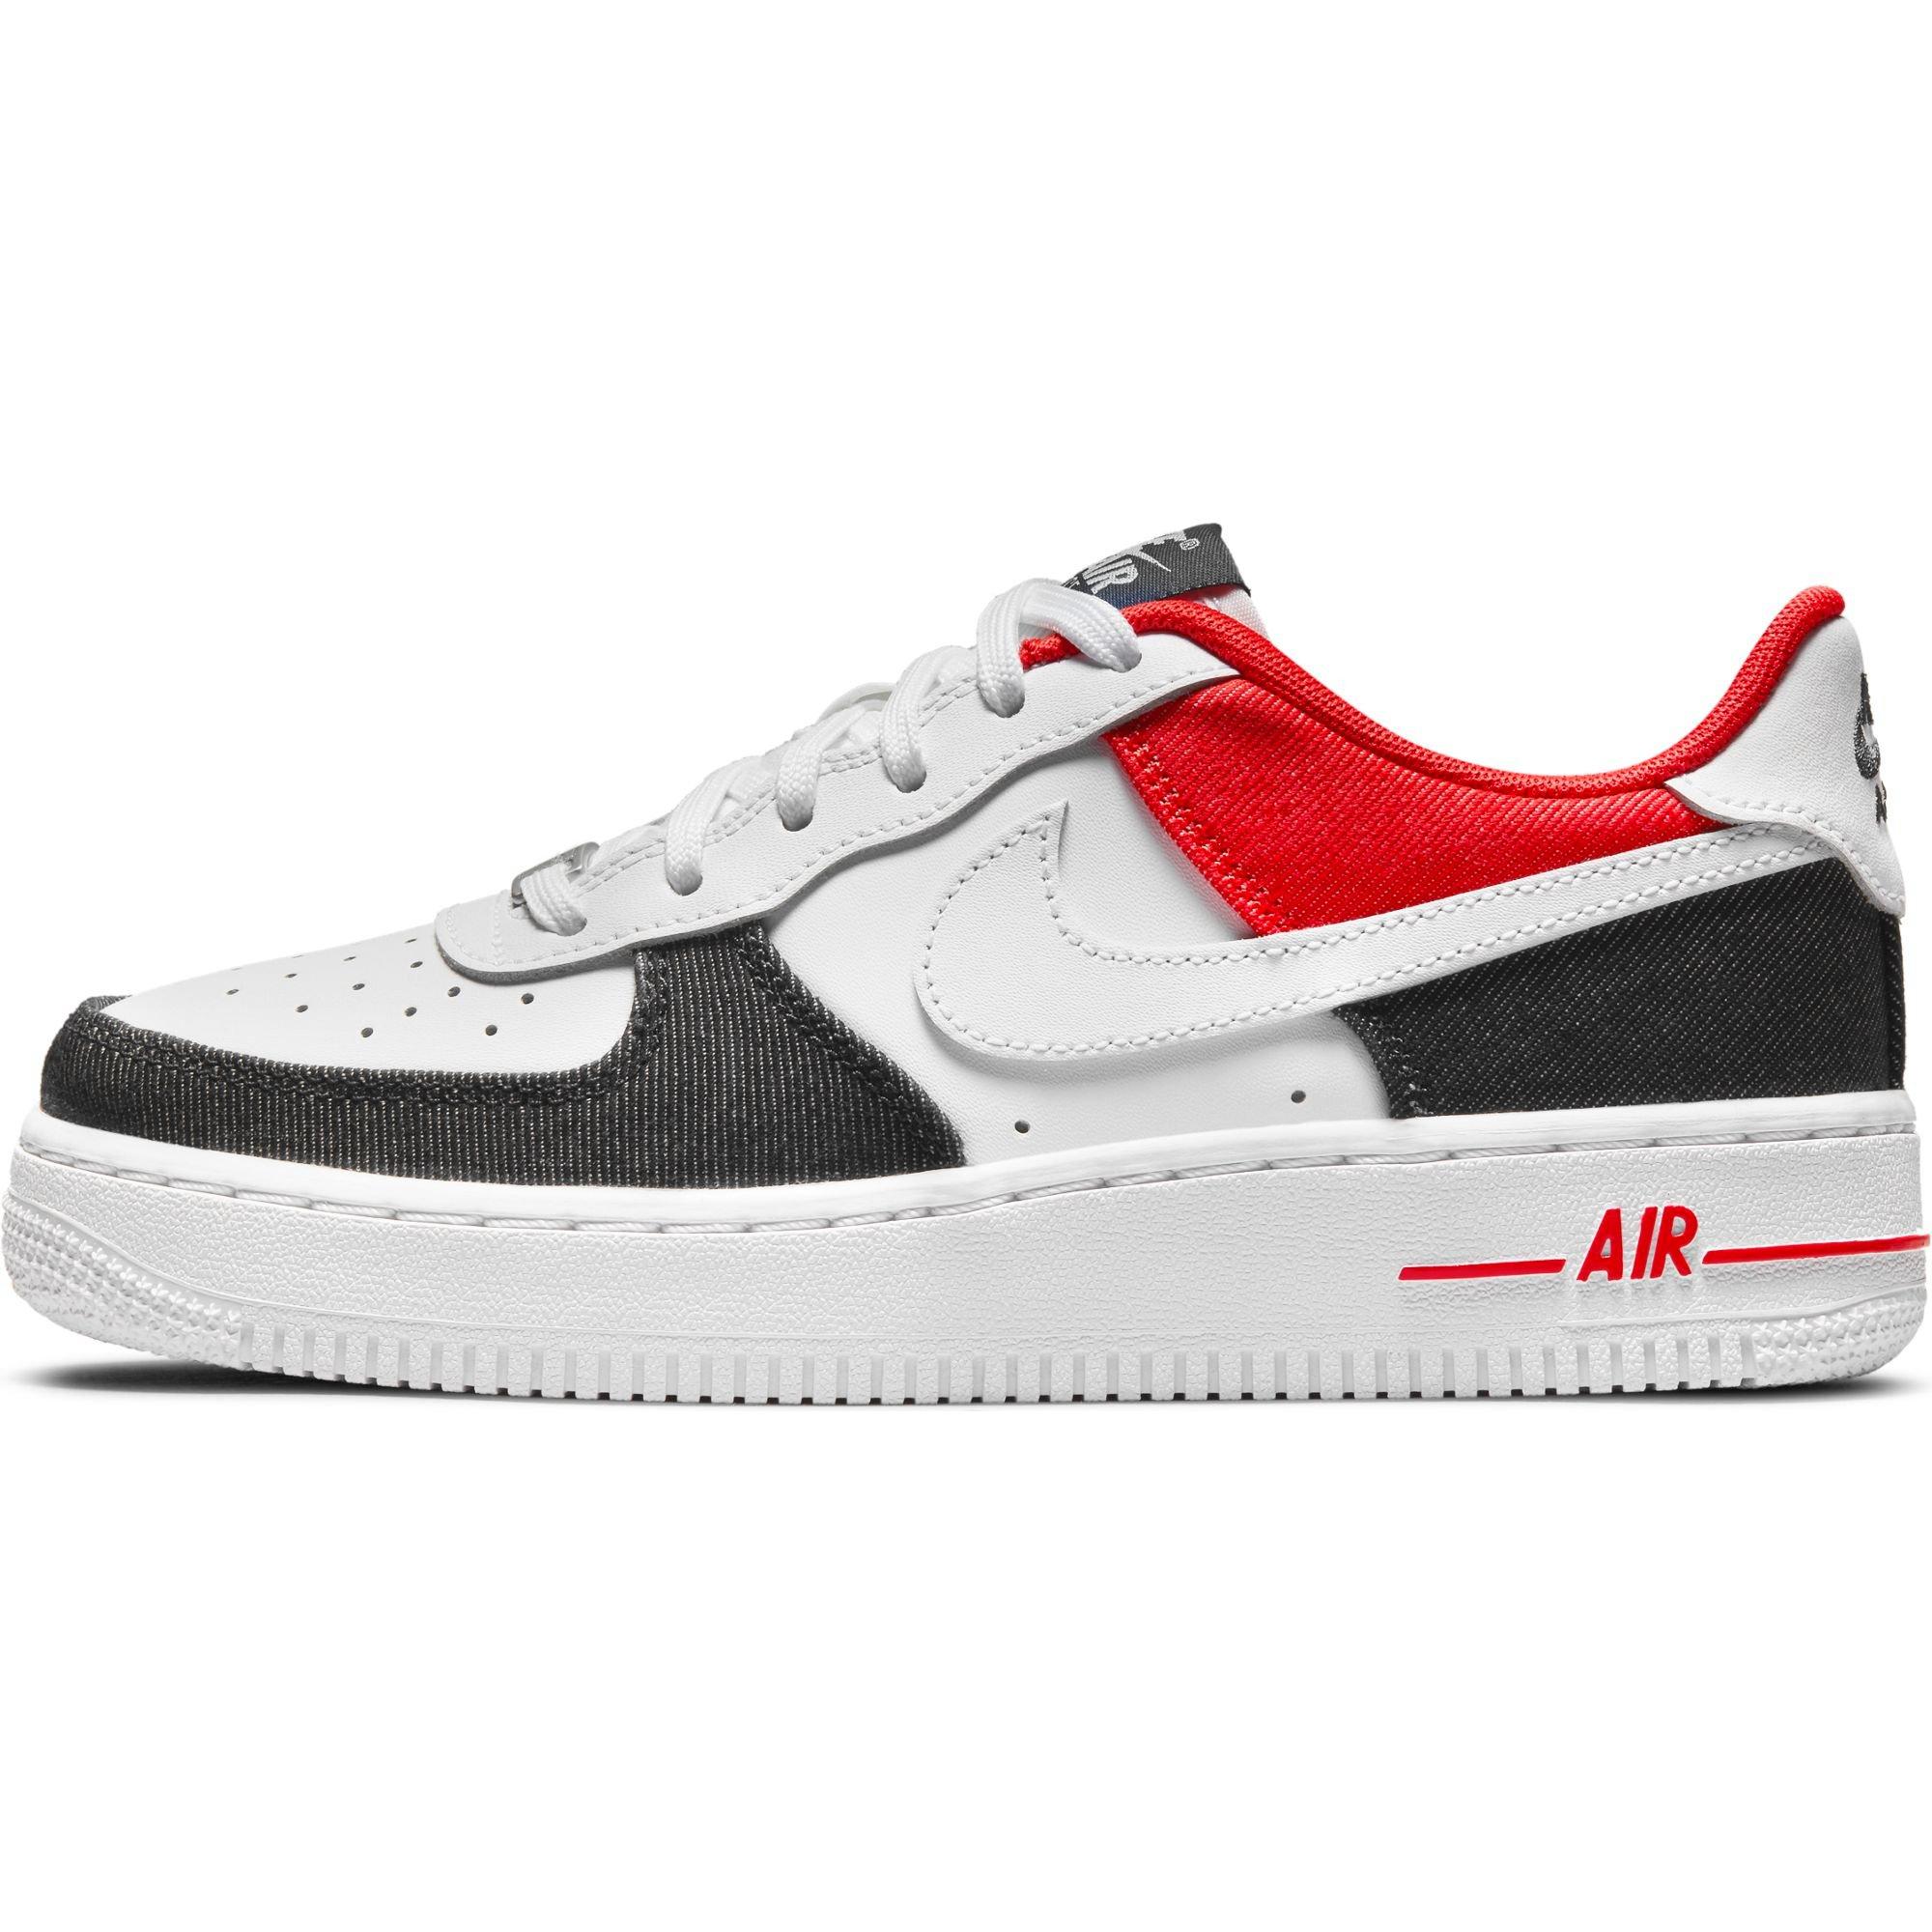 Nike Boys Air Force 1 LV8 Emb - Basketball Shoes Black/Chile Red Size 06.0